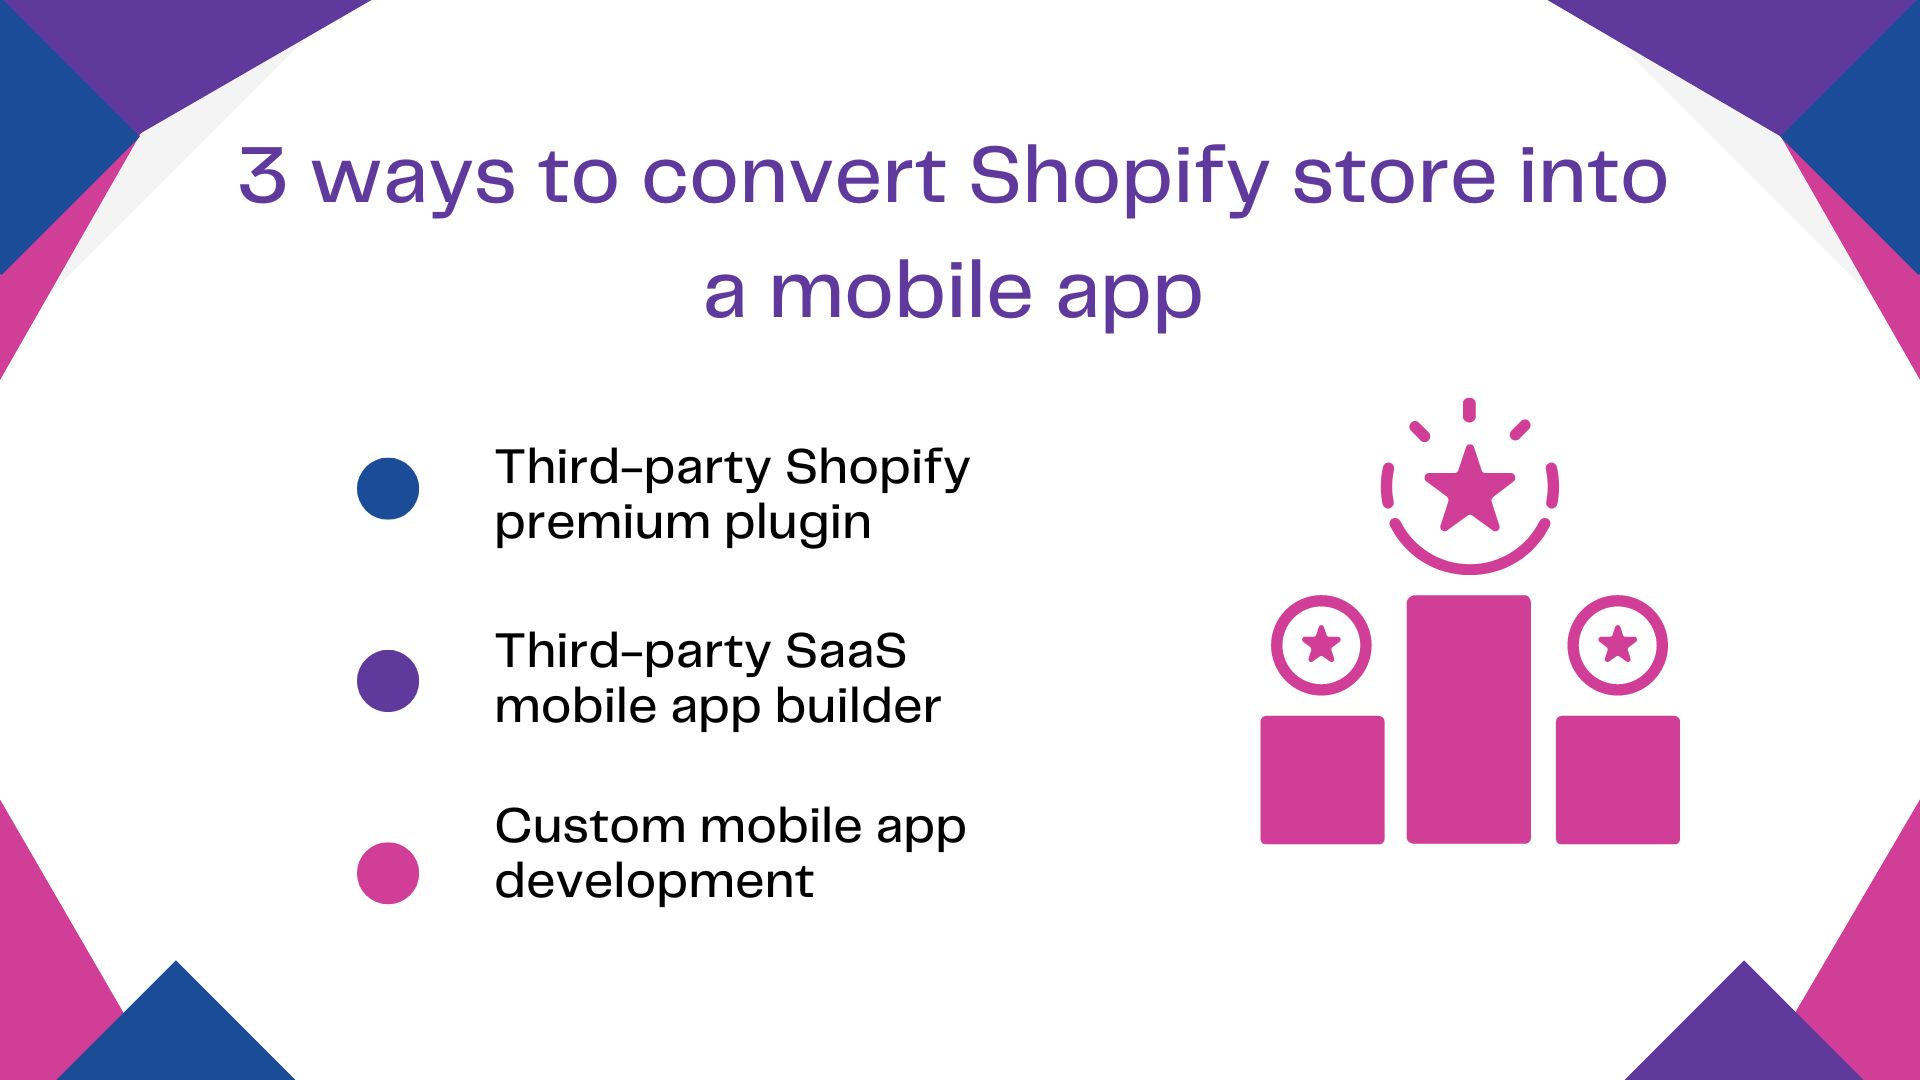 Turn Shopify store into a mobile app: ways to convert a store into an app